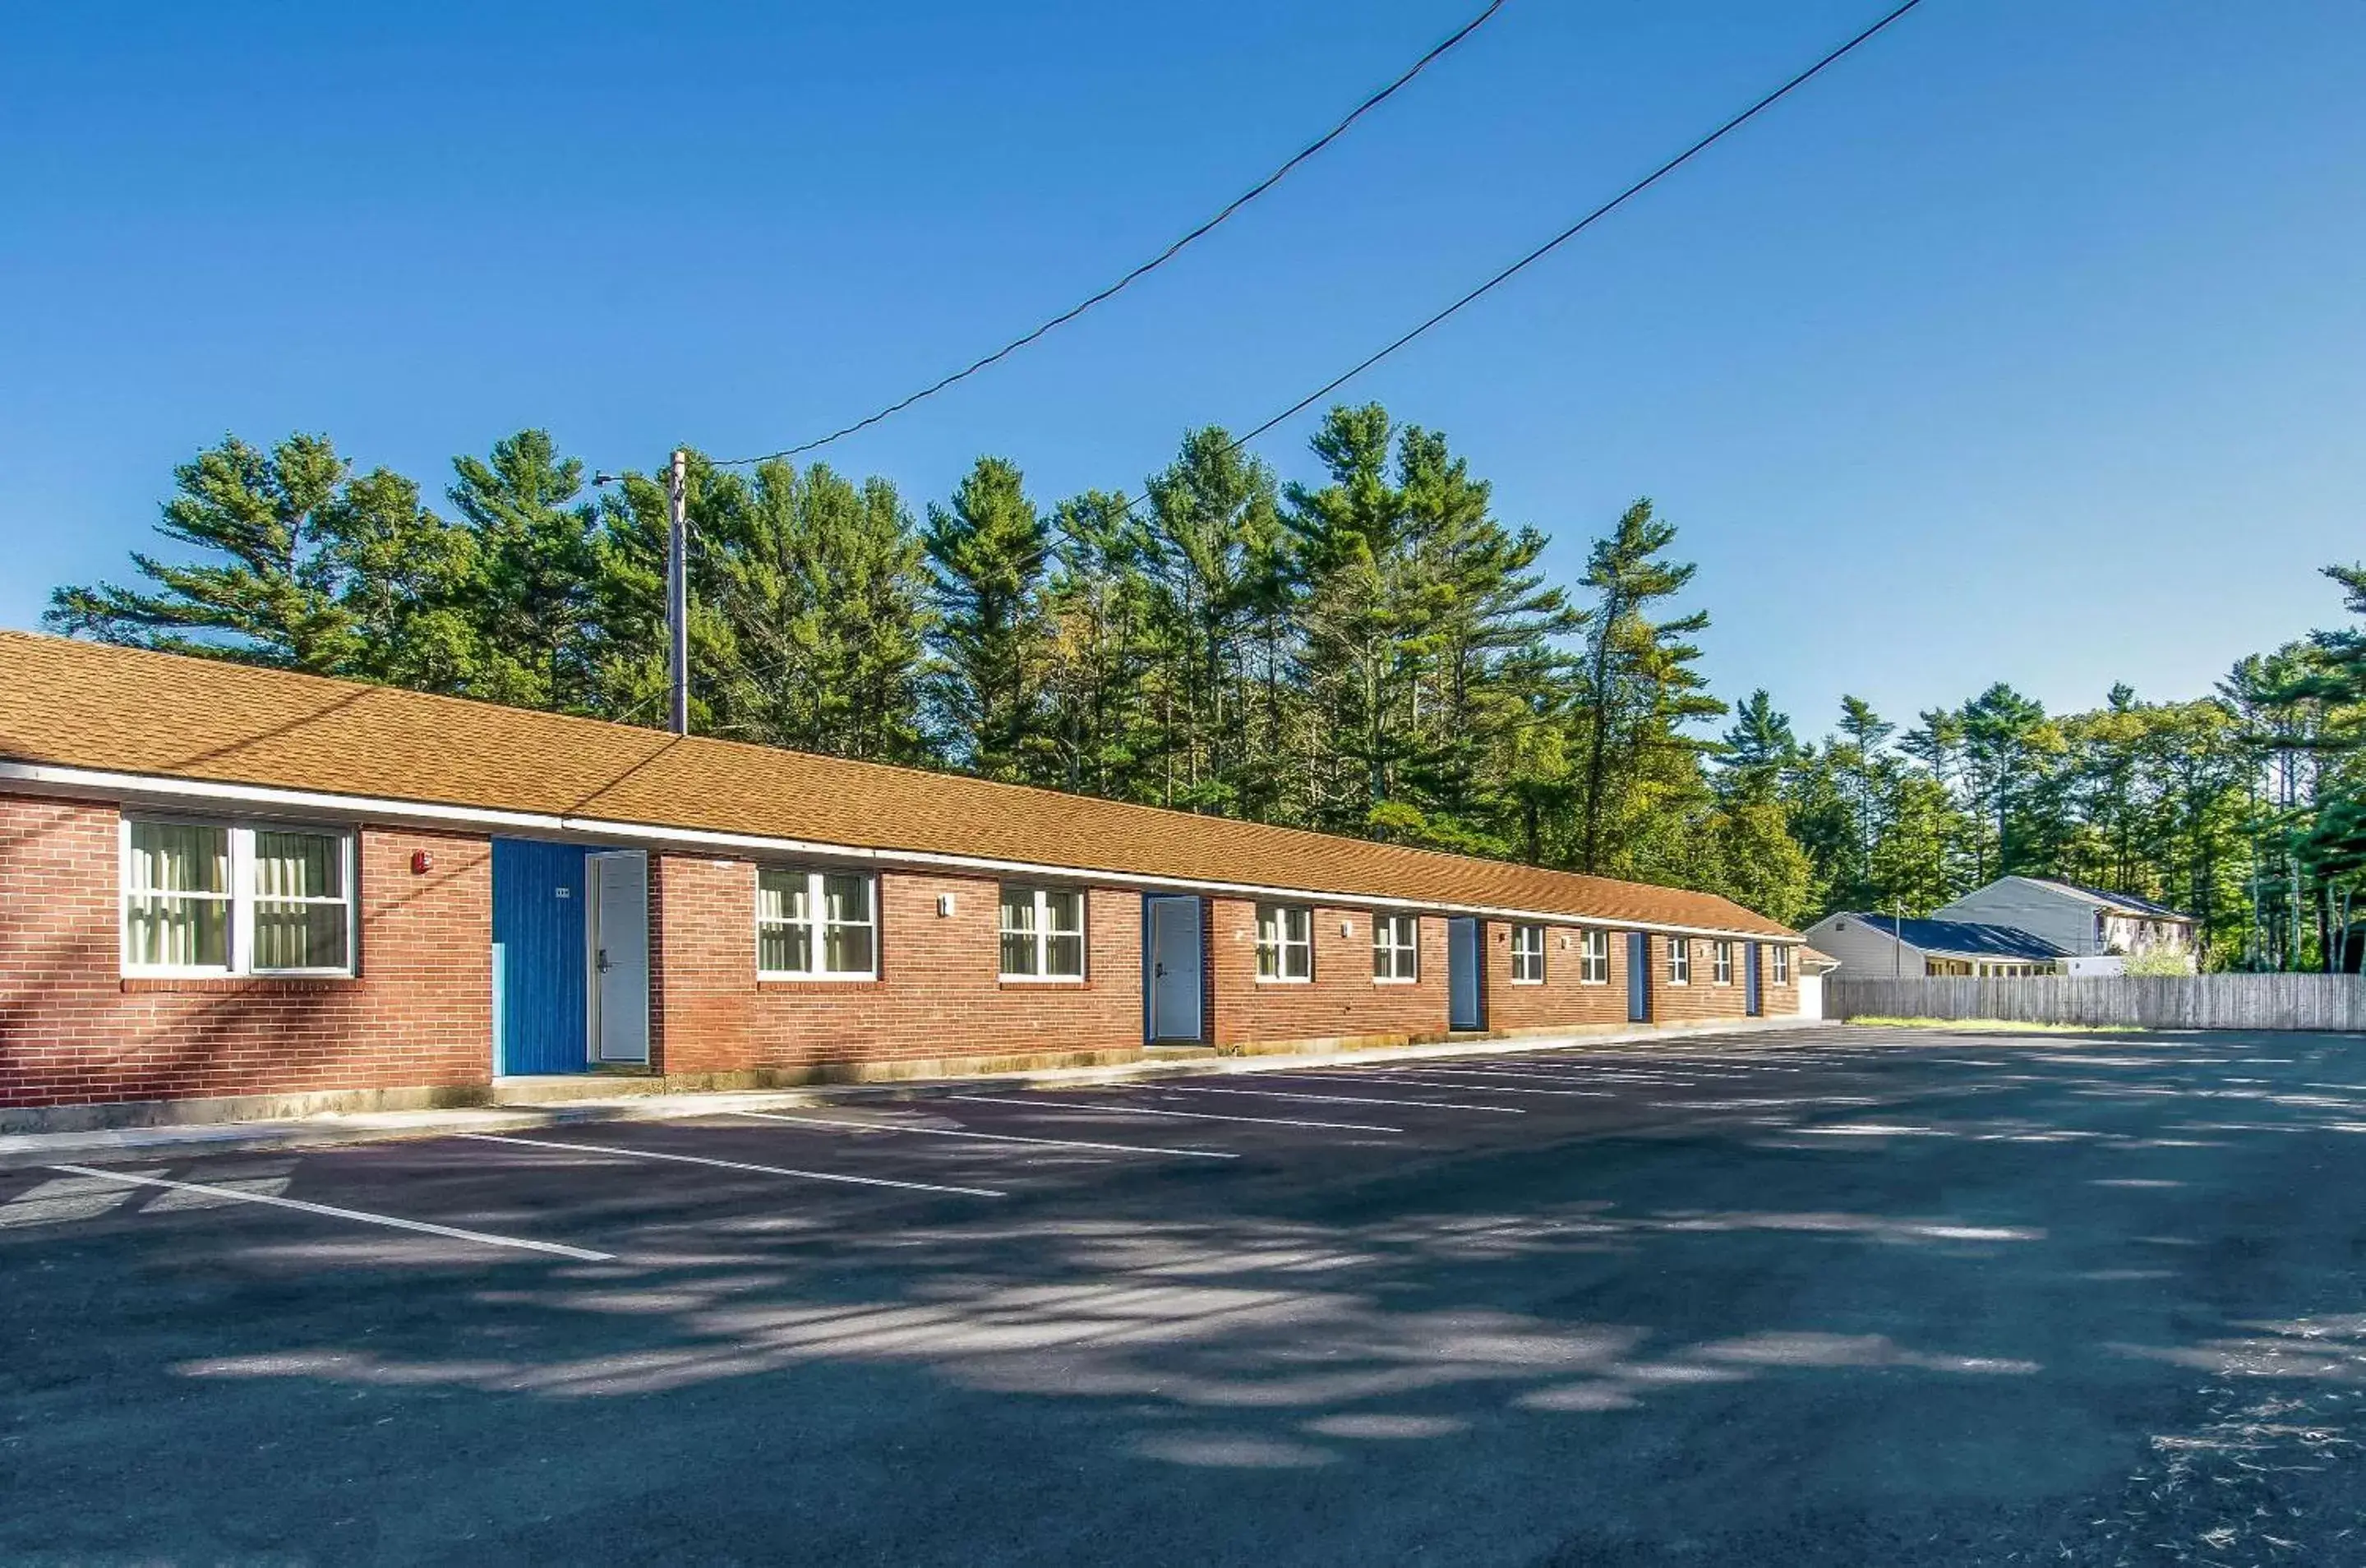 Property Building in Rodeway Inn Middleboro-Plymouth